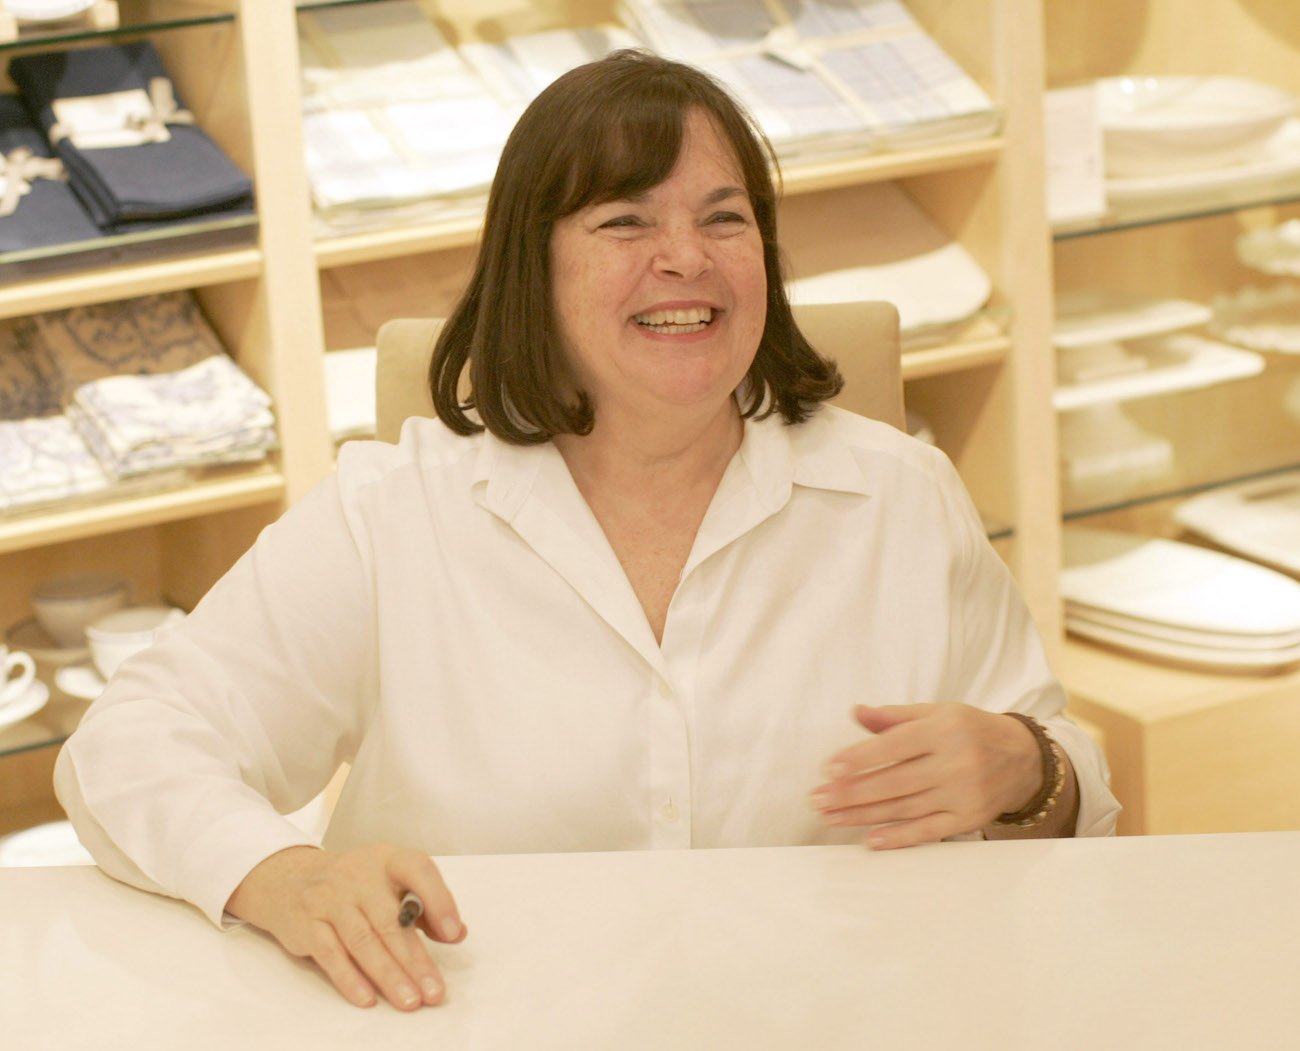 Ina Garten smiles wearing a white button-down shirt while sitting at a table